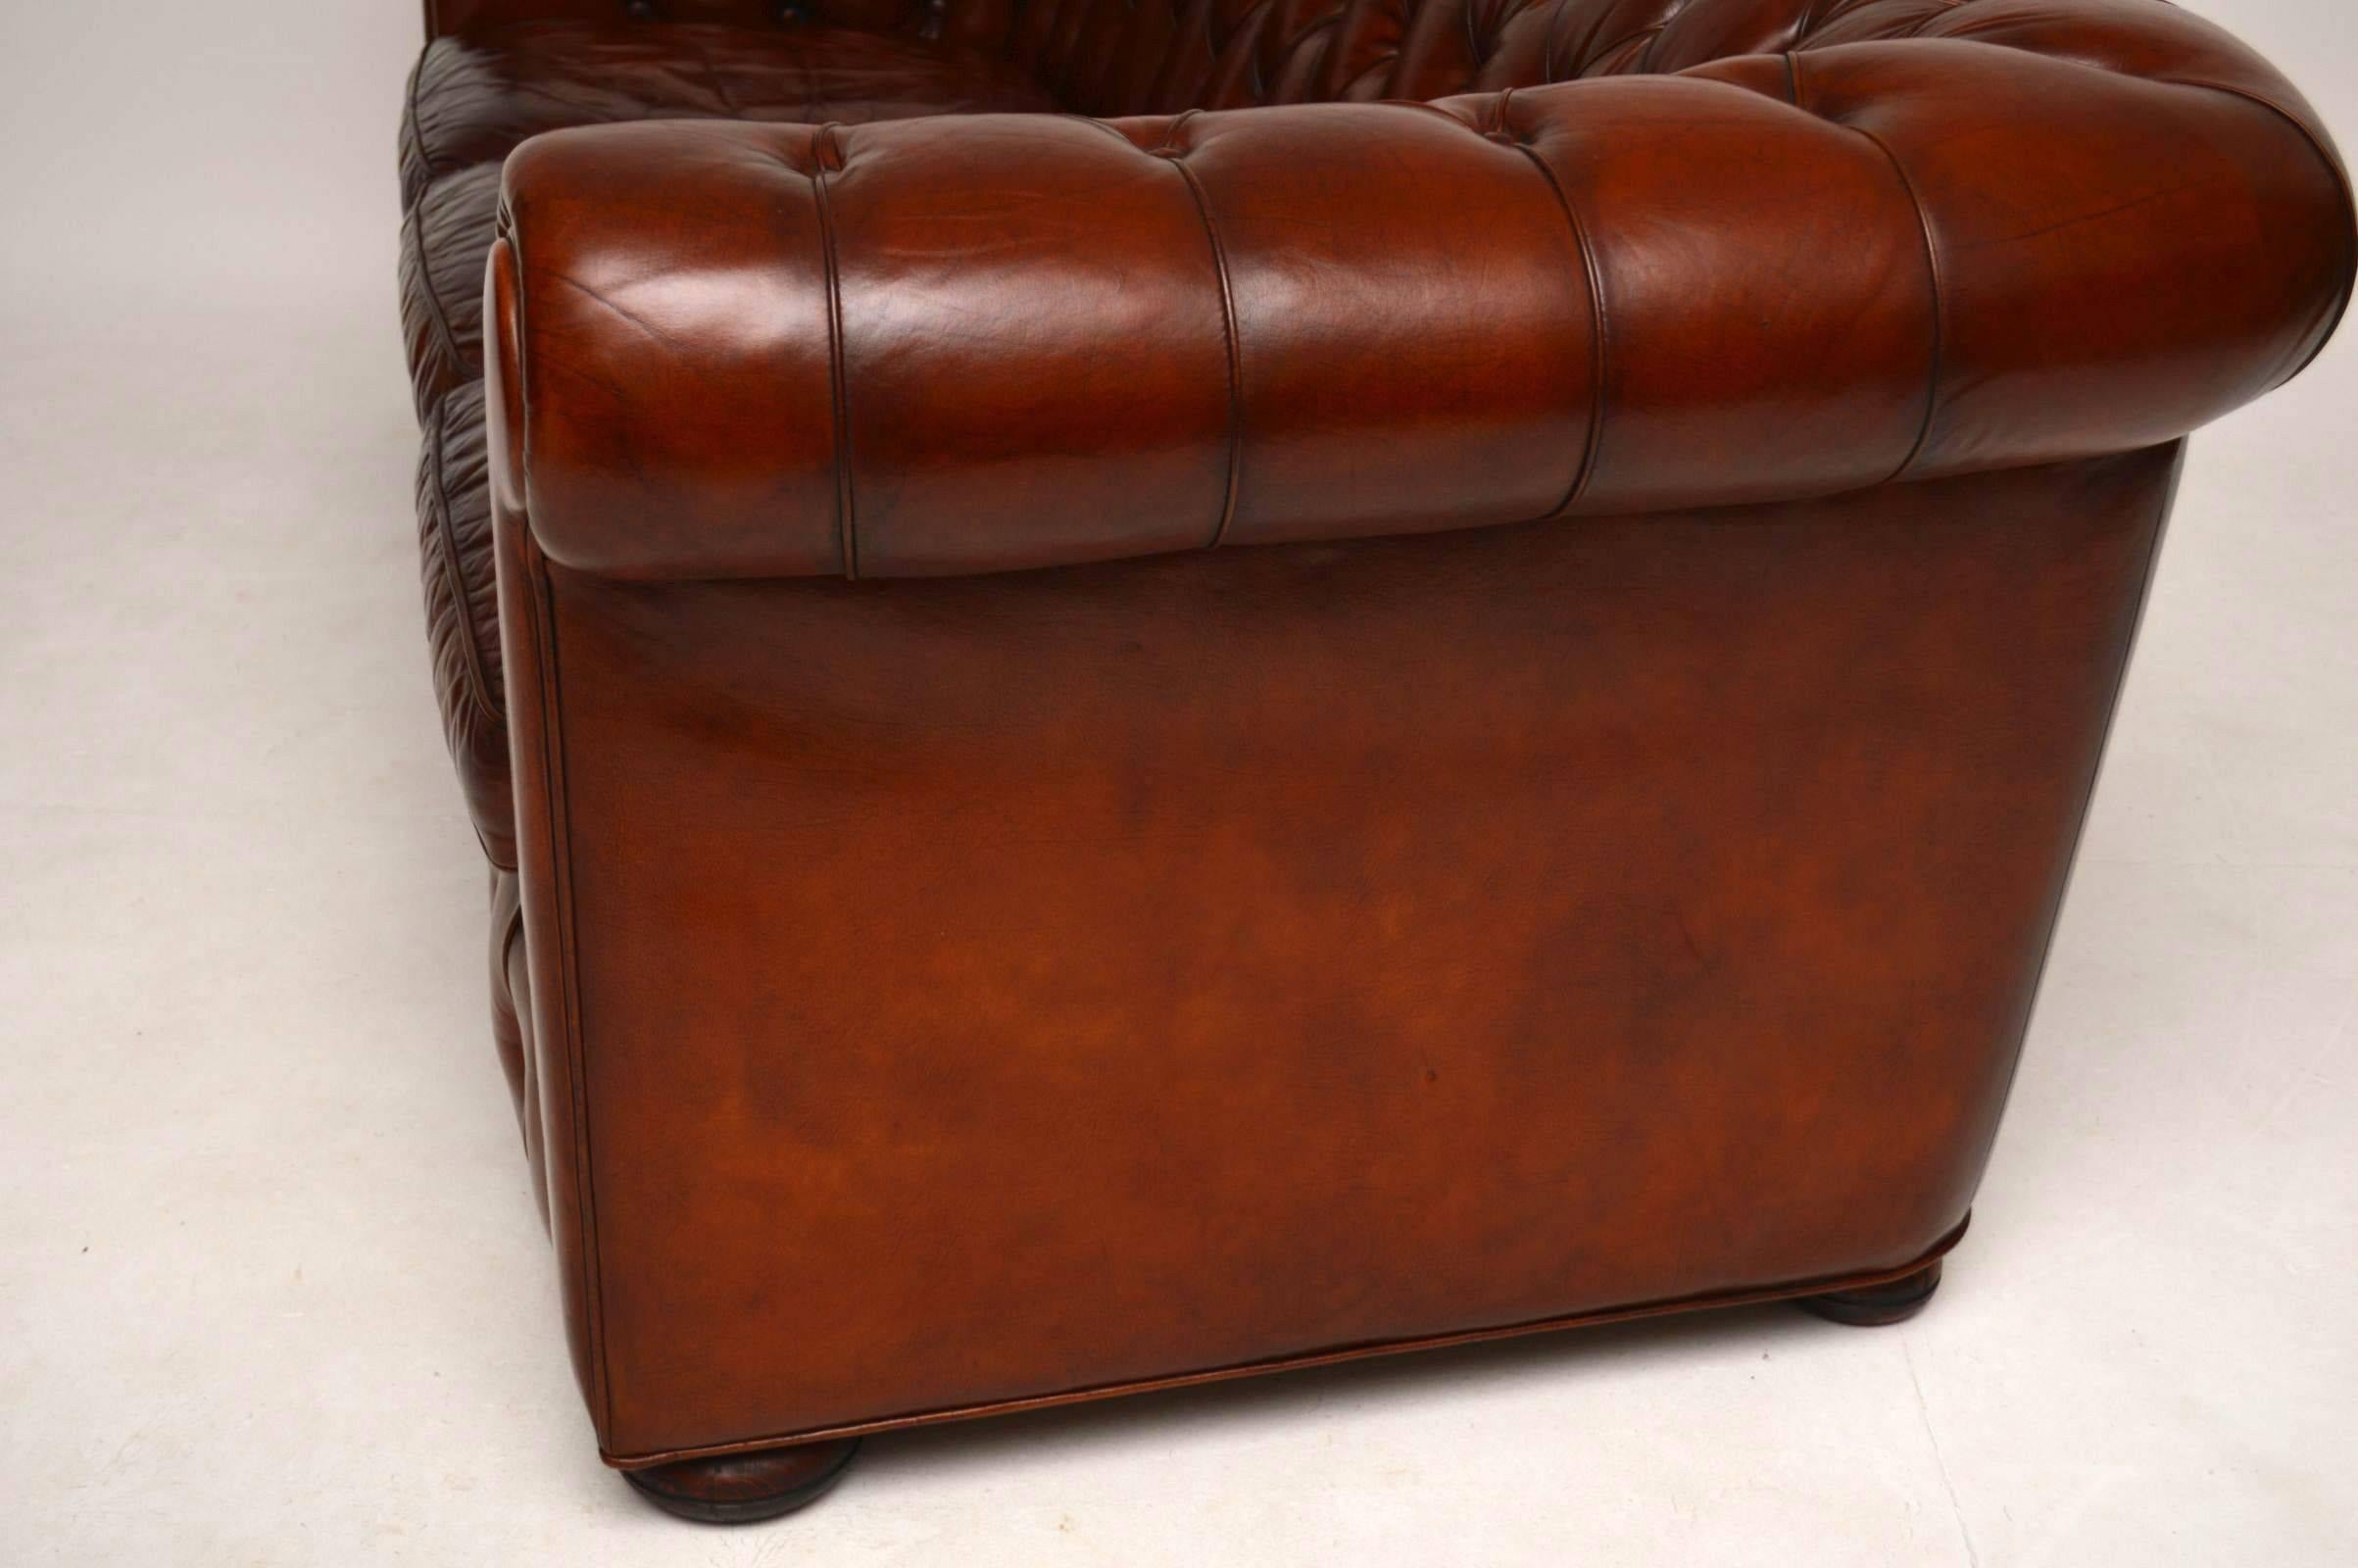 Antique Leather Three-Seat Chesterfield Sofa 2